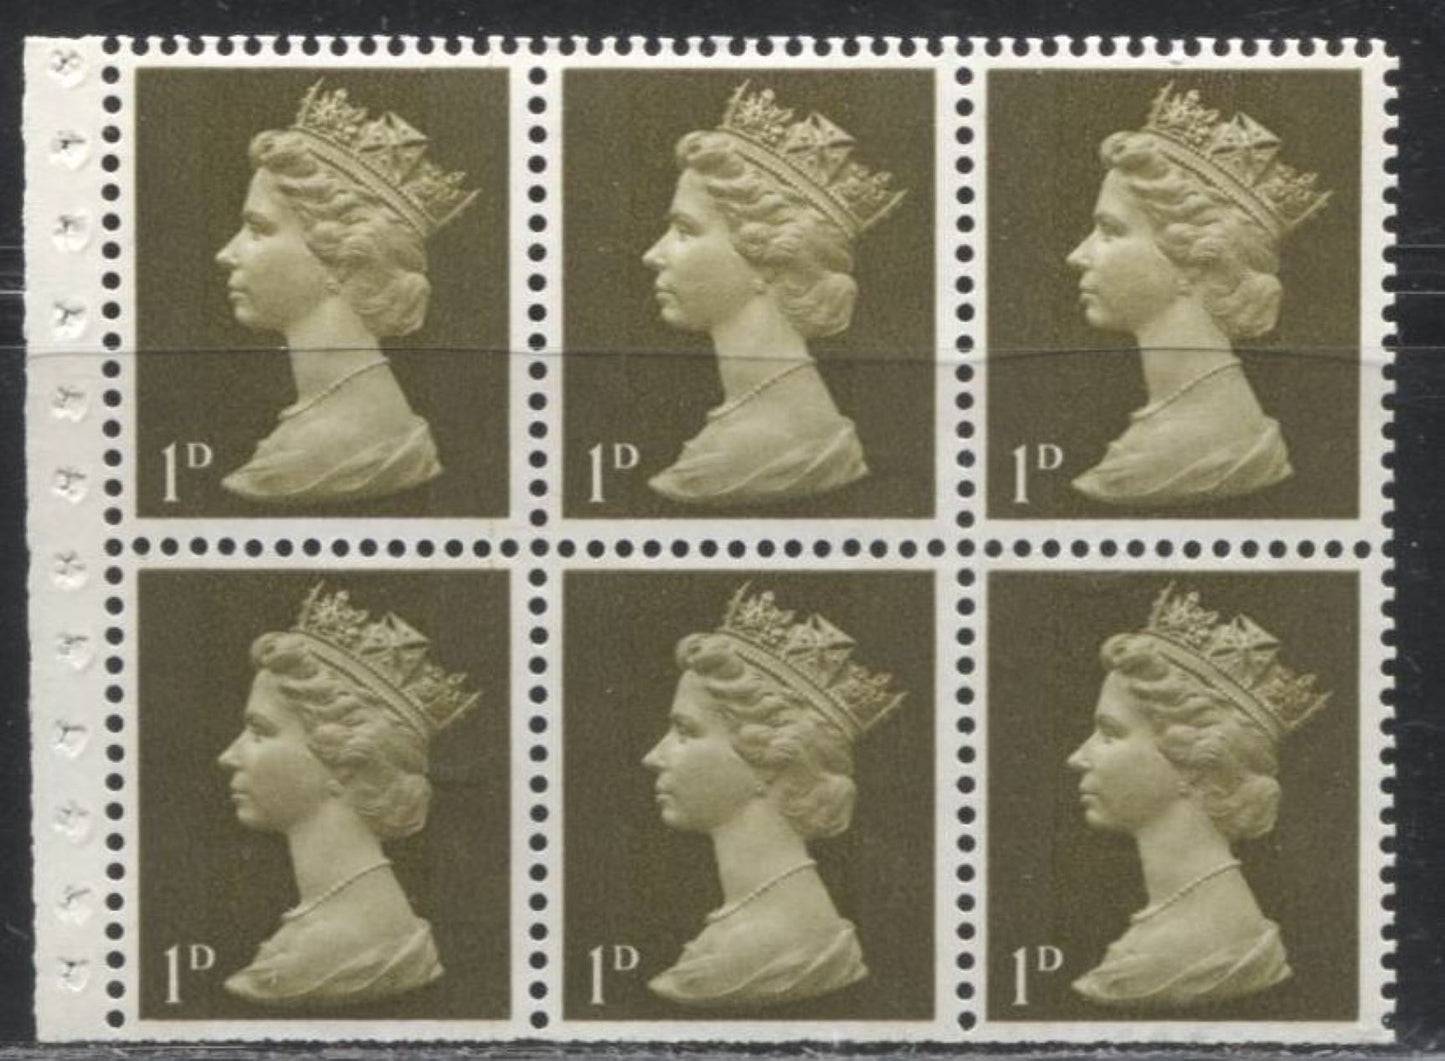 Great Britain SG#LP52 4/6d- Black on Grey Blue 1967-1971 Pre-Decimal Machin Heads Issue, A Booklet From July 1969, Various Fluorescence Levels For Interleaving Pages, Dull Fluorescent "Dreadnought" Cover on Front and High Fluorescent Back Cover